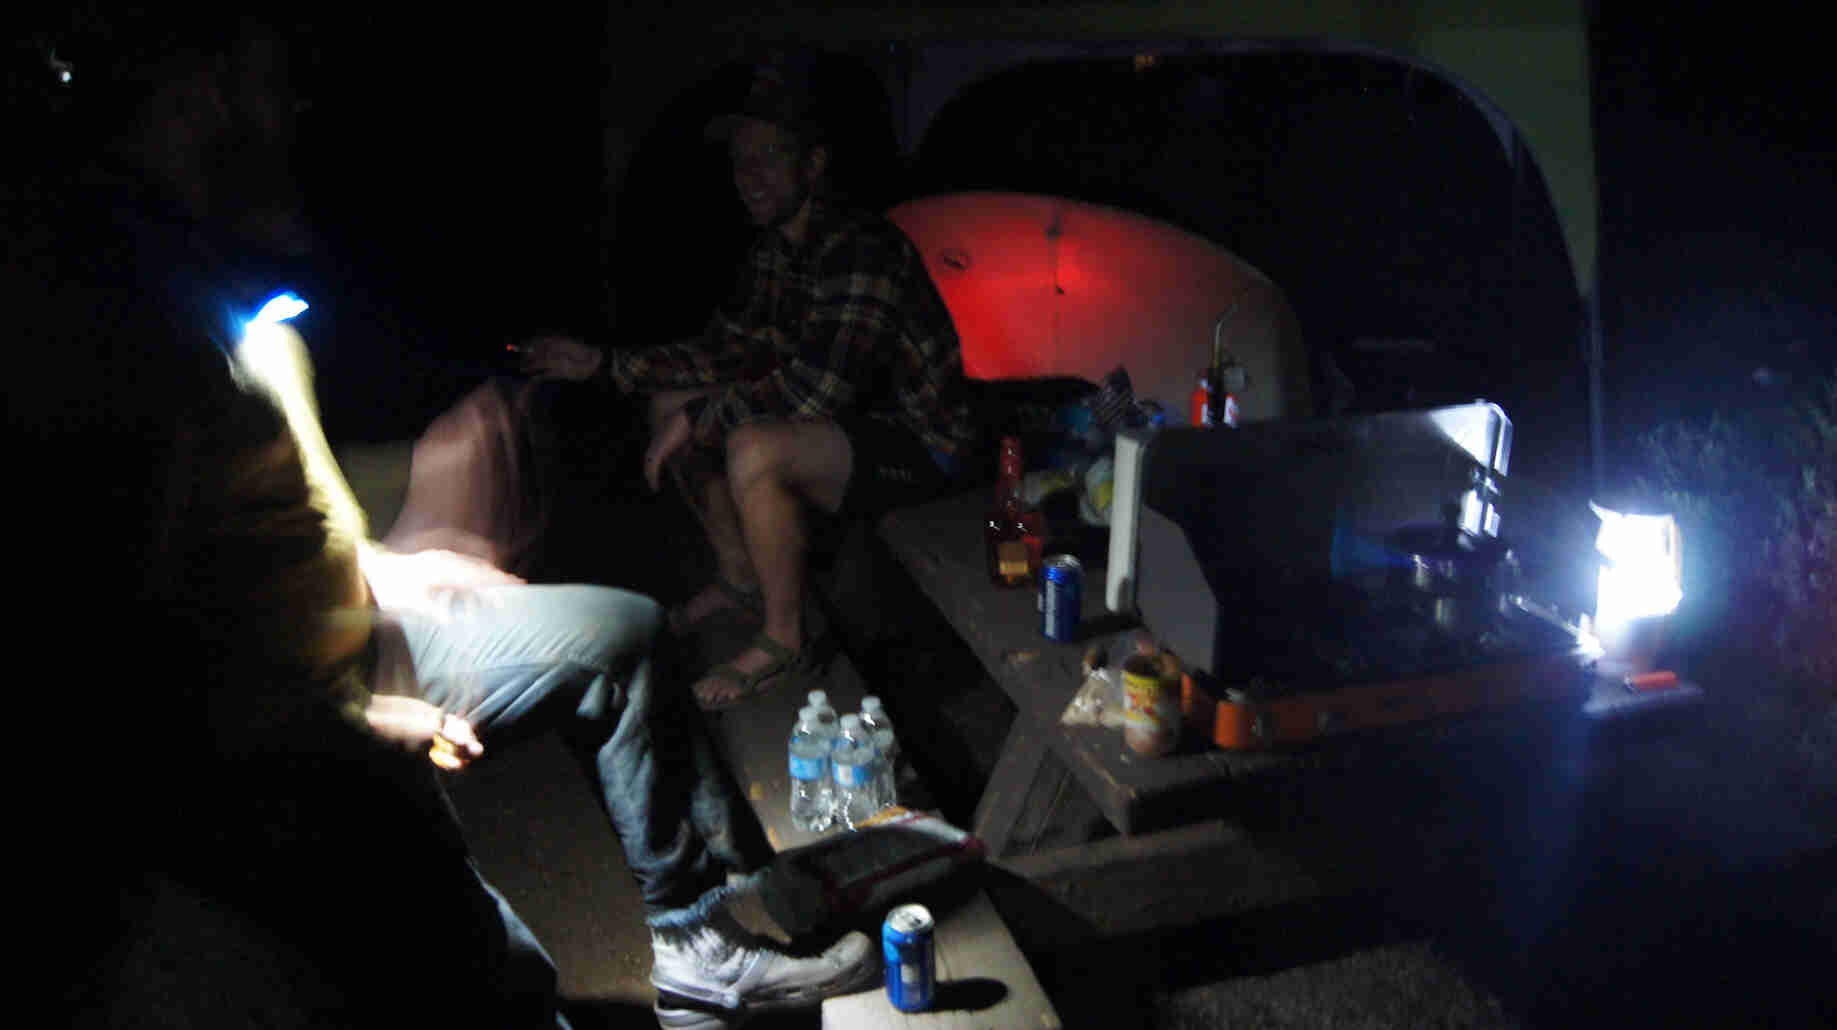 Two people sitting on a picnic table with a tent in the background, in a campsite at night